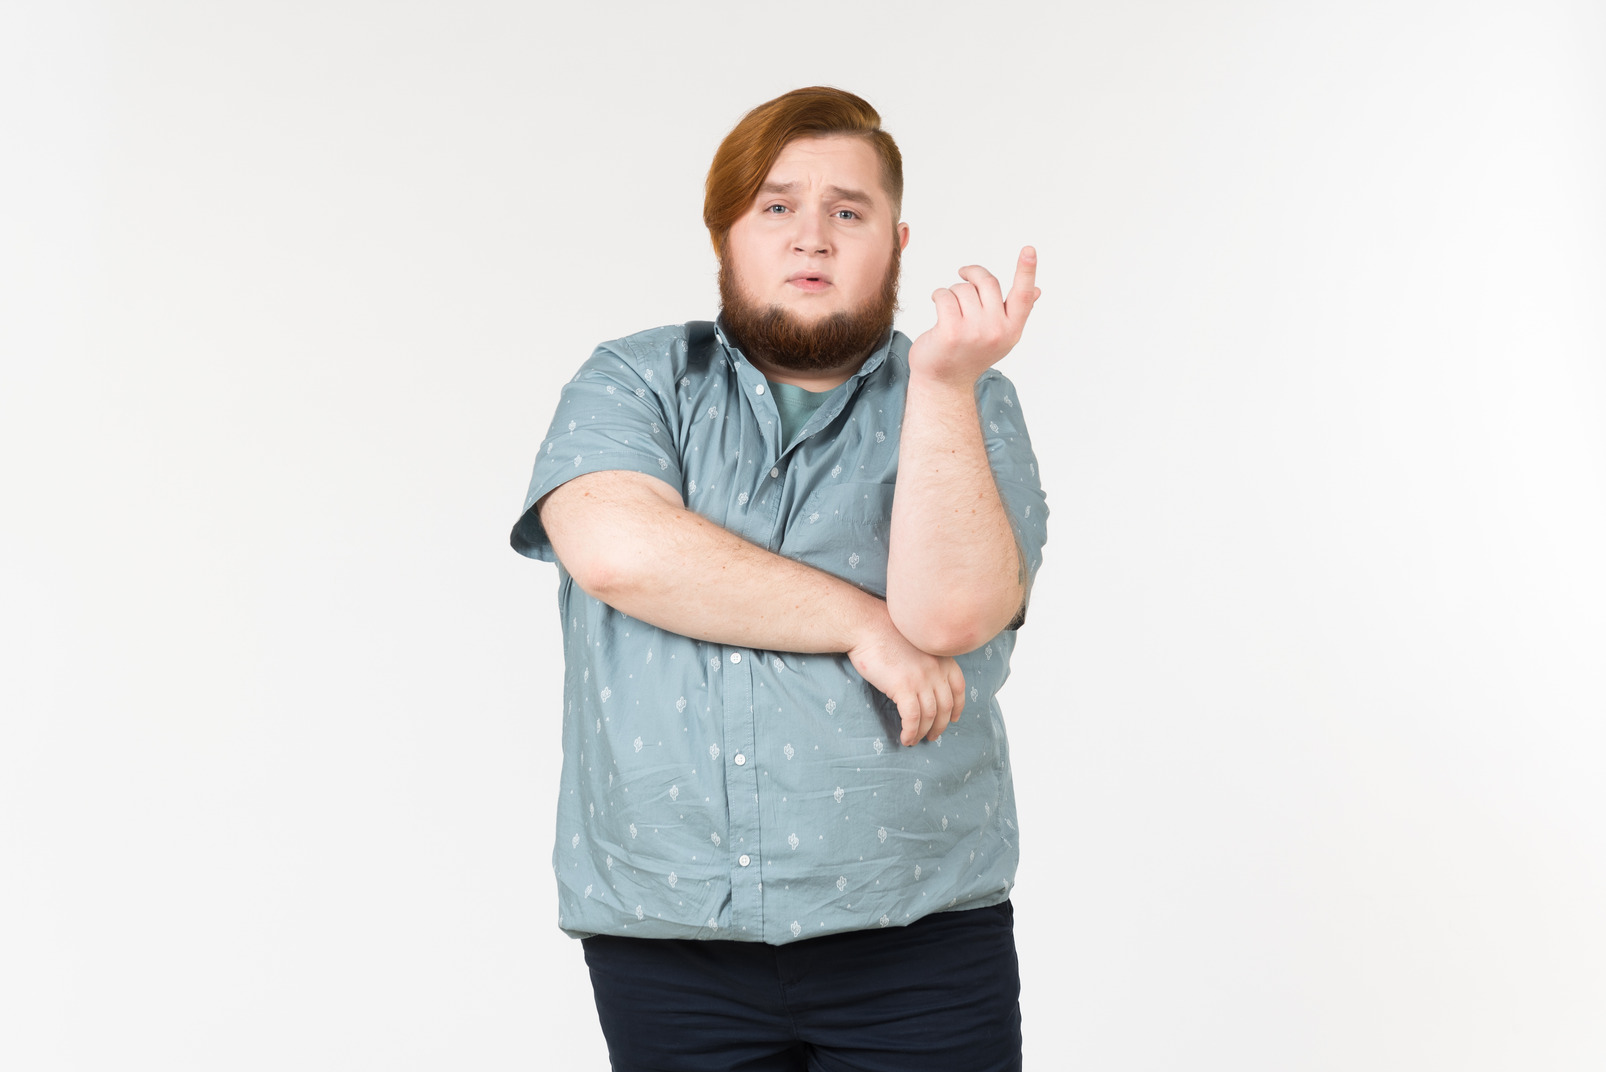 Pensive young overweight man standing with hands crossed